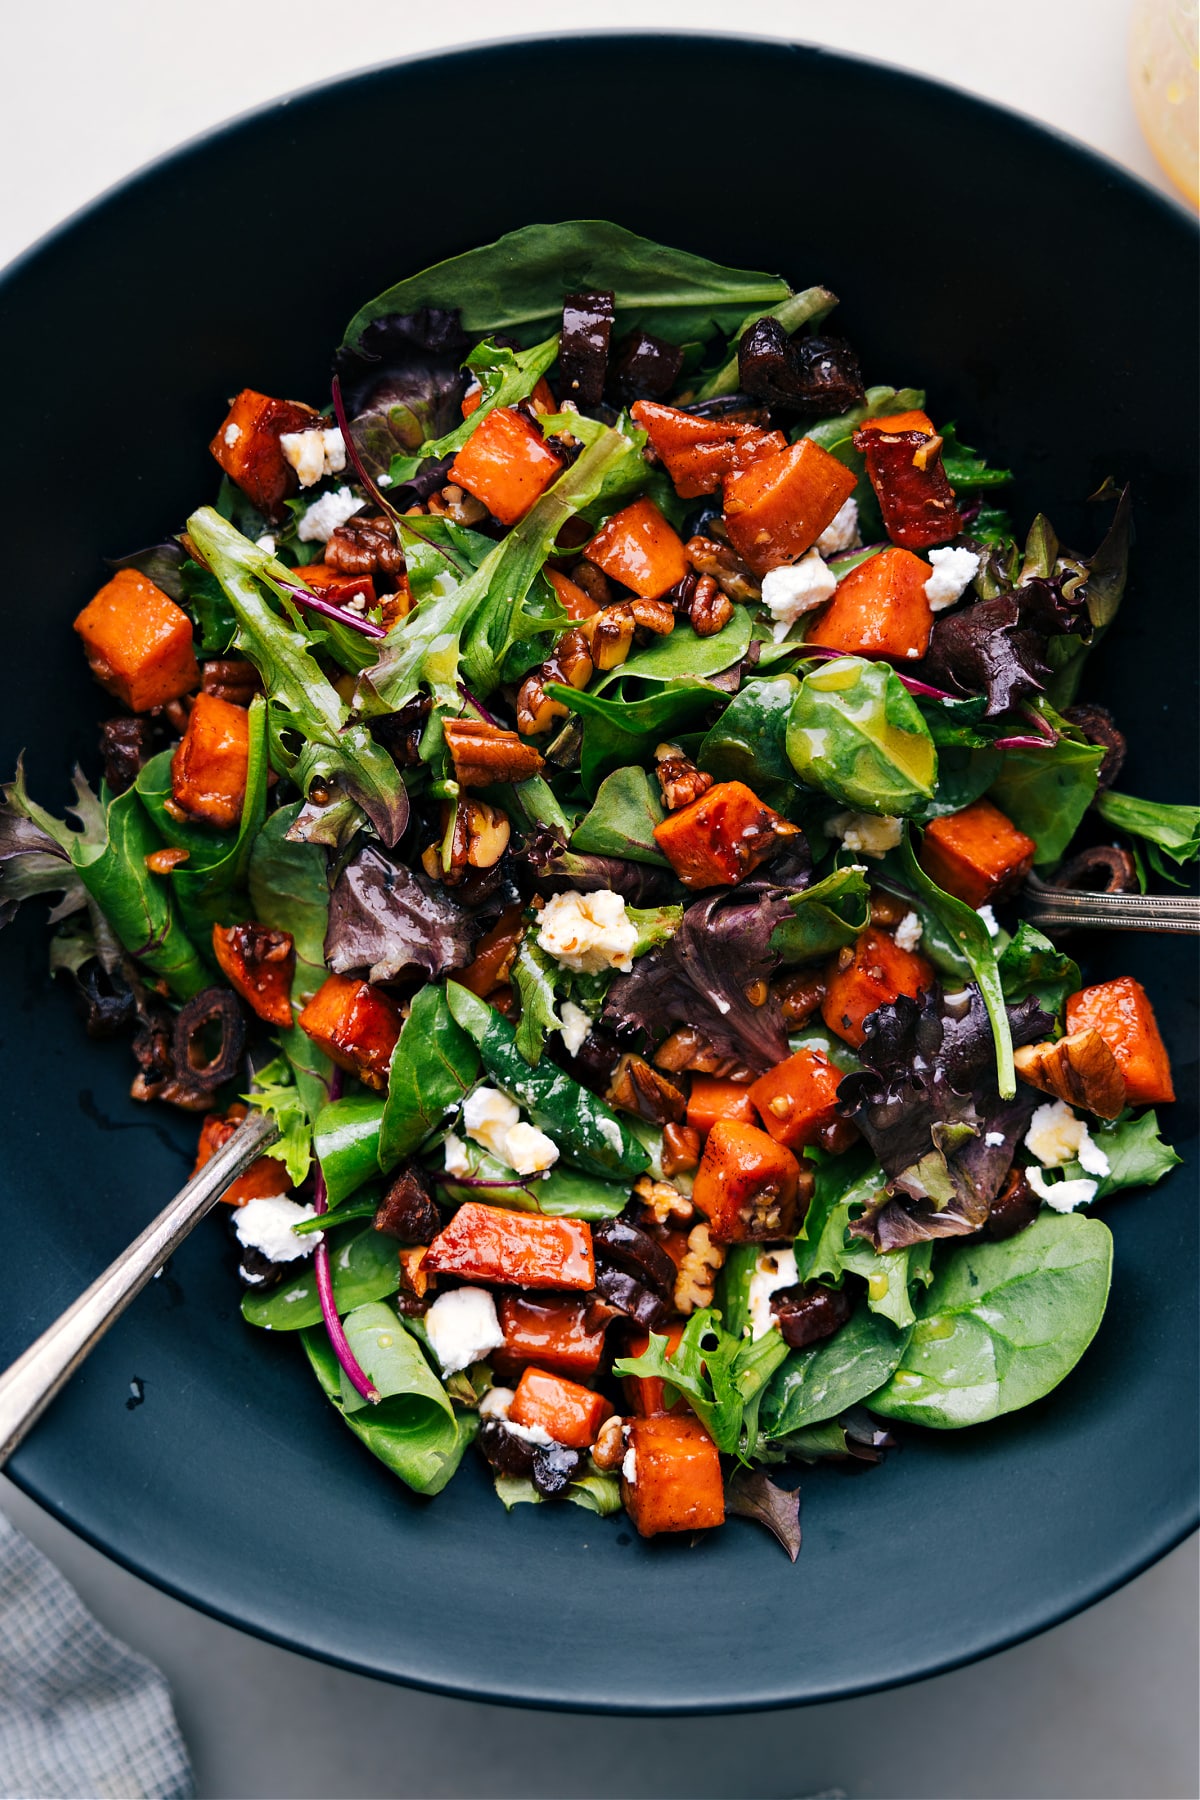 A vibrant bowl of sweet potato salad, featuring diced roasted sweet potatoes mixed with various colorful ingredients.